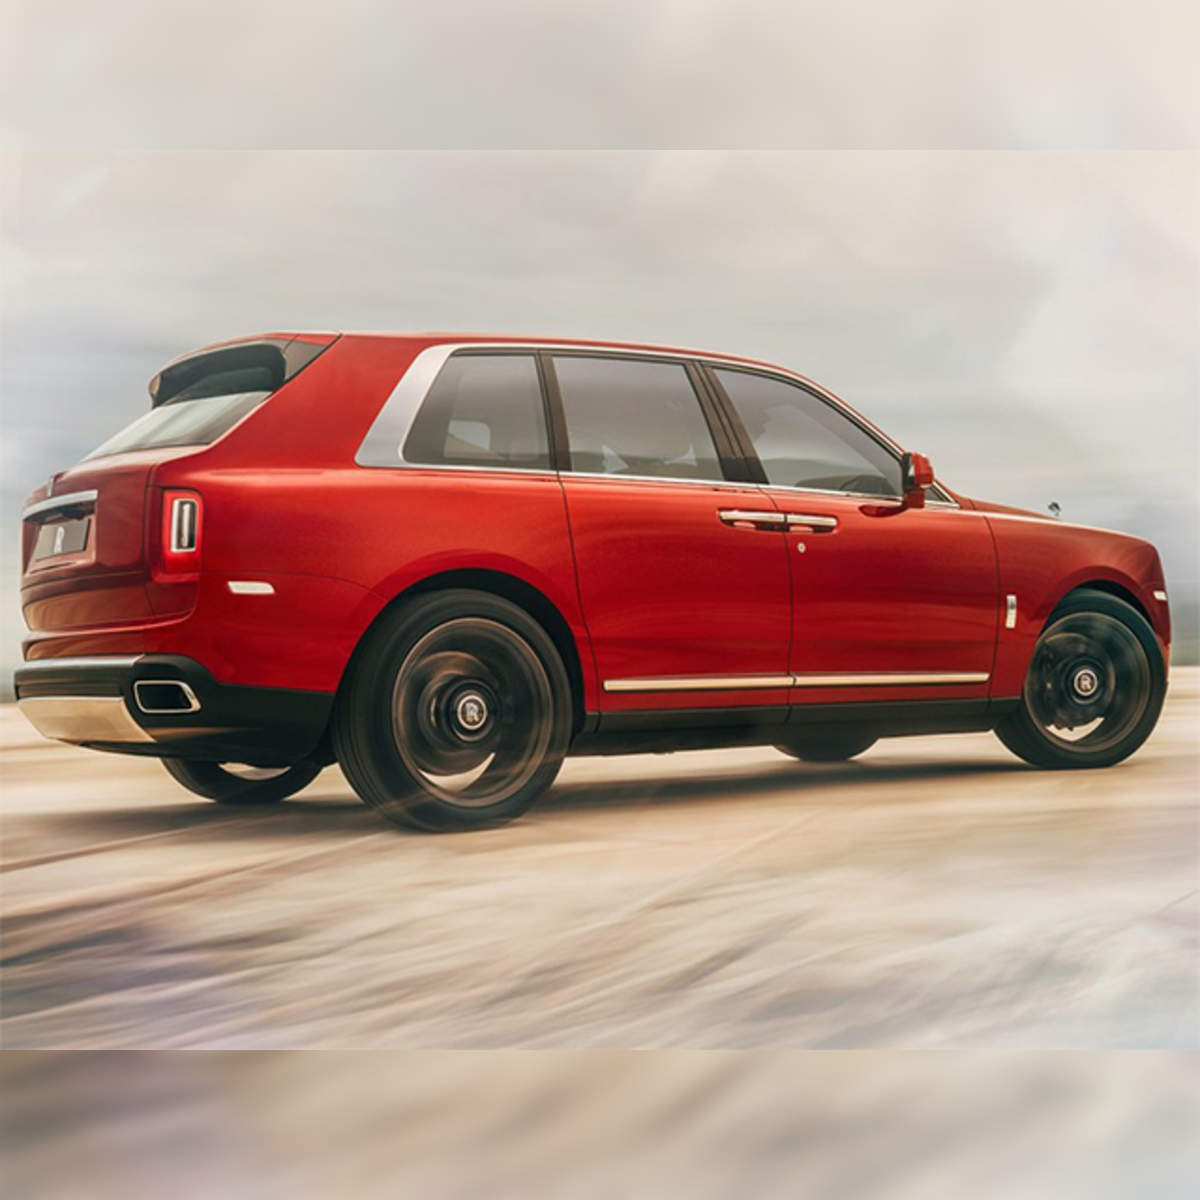 The Rolls-Royce Cullinan: Meet the world's most expensive SUV - ABC News